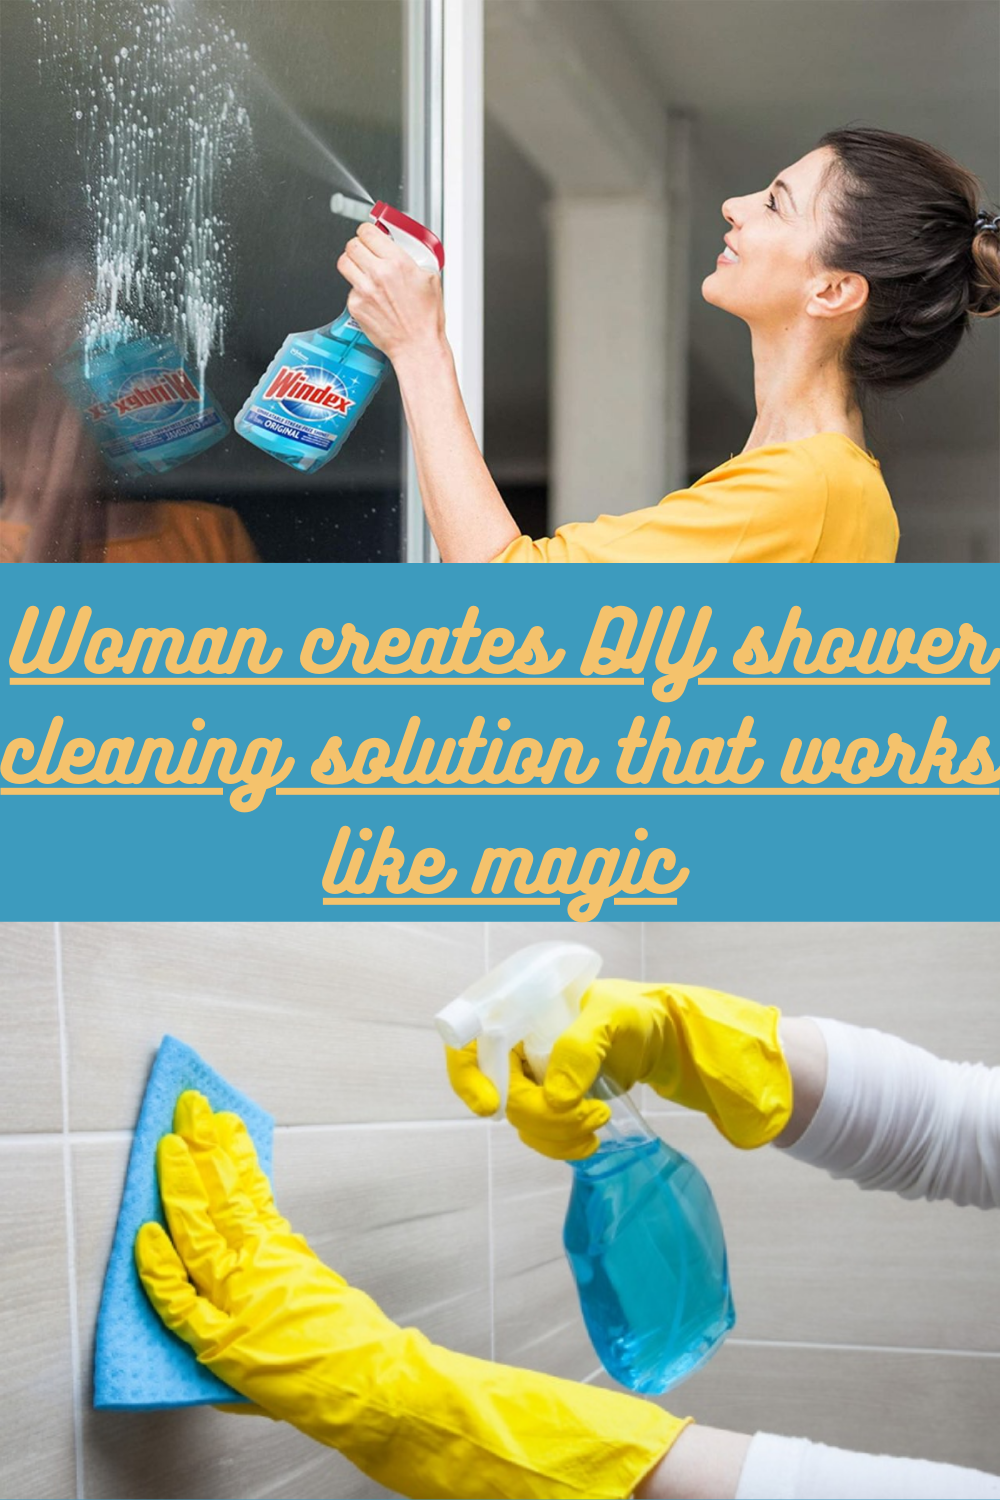 Woman creates DIY shower cleaning solution that works like magic